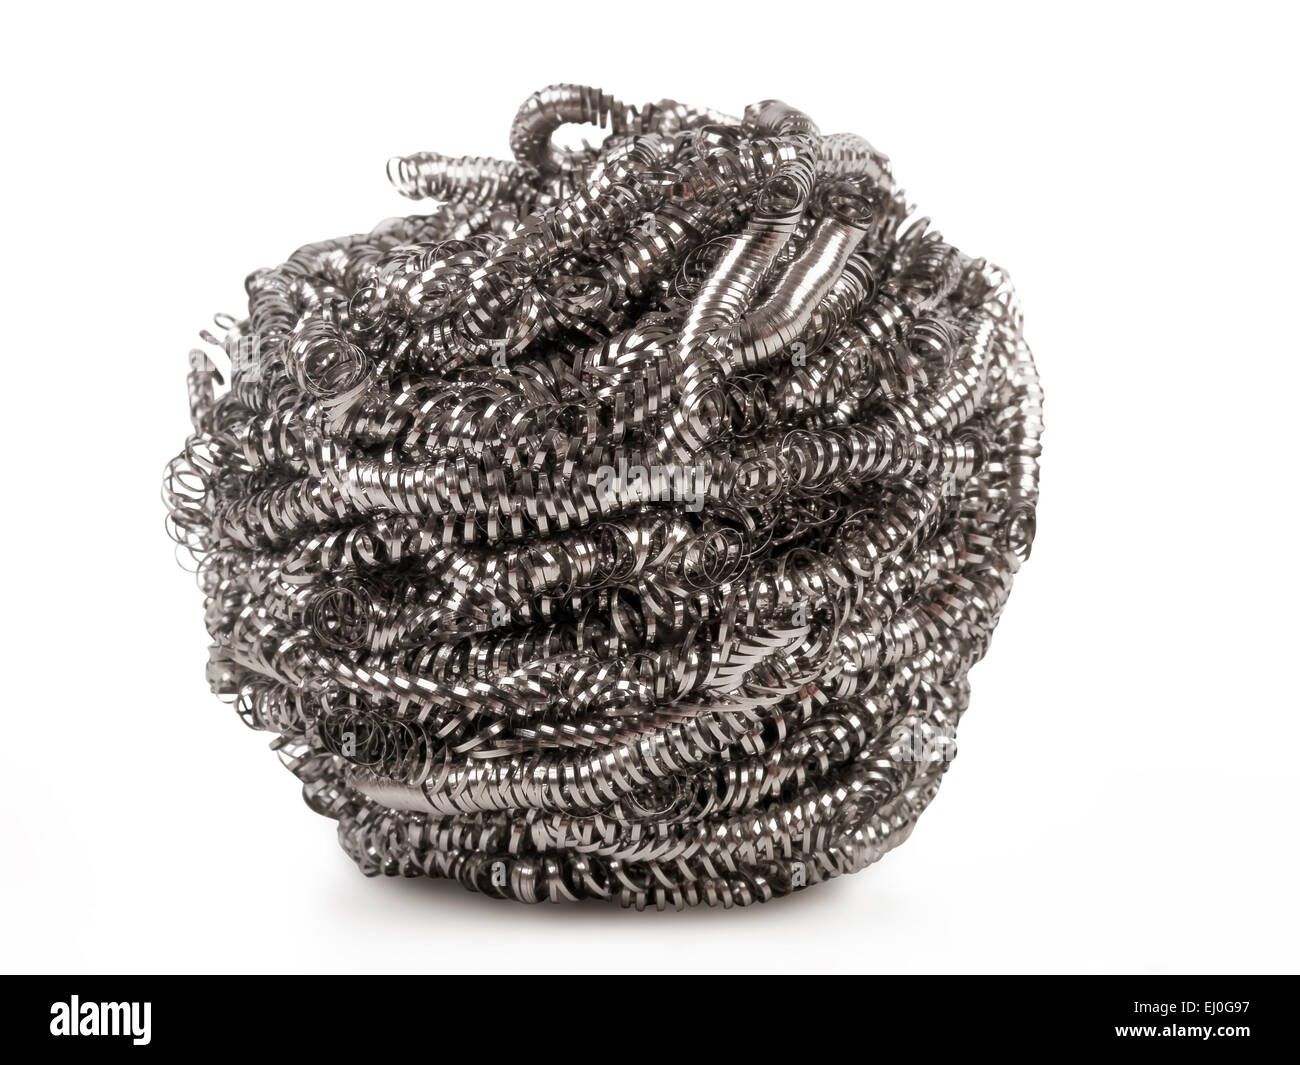 https://c8.alamy.com/comp/EJ0G97/wire-sponge-for-washing-dishes-isolated-on-white-background-studio-EJ0G97.jpg